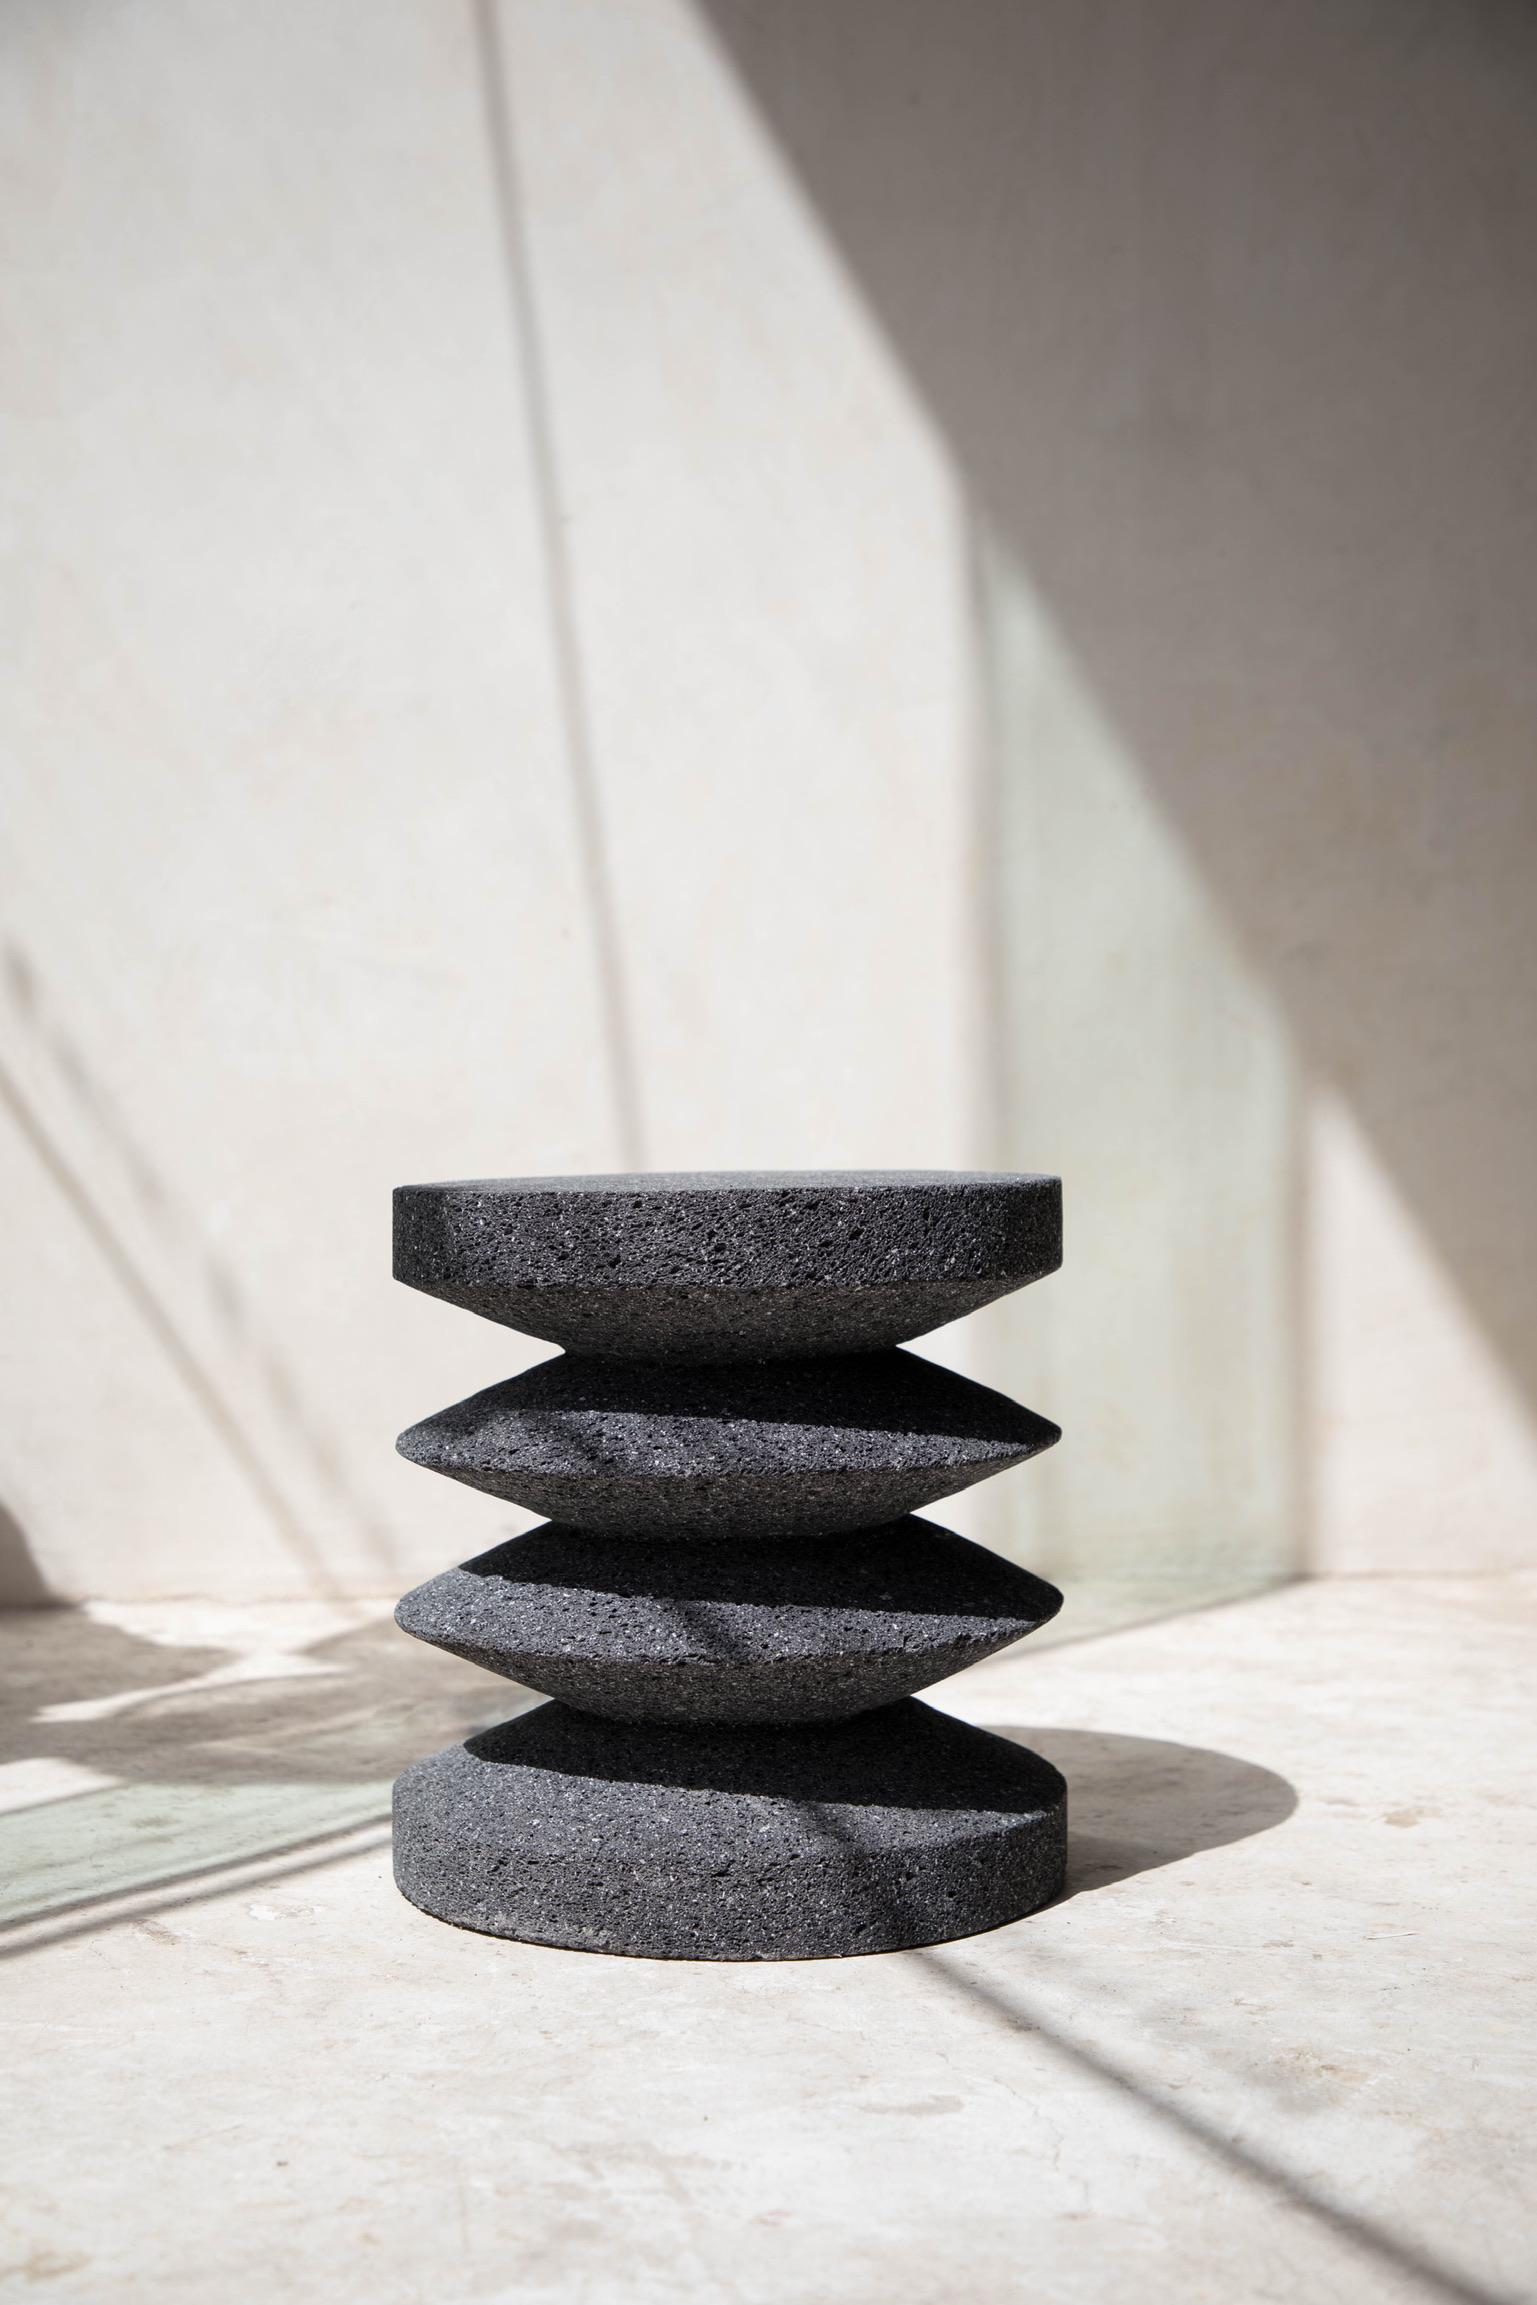 Stone totem 23 by Daniel Orozco
Material: Volcanic rock.
Dimensions: D 30 x H 45 cm

Volvanic rock Totem.

Daniel Orozco Estudio
We are an inclusive interior design estudio, who love to work with fabrics and natural textiles in makes our spaces